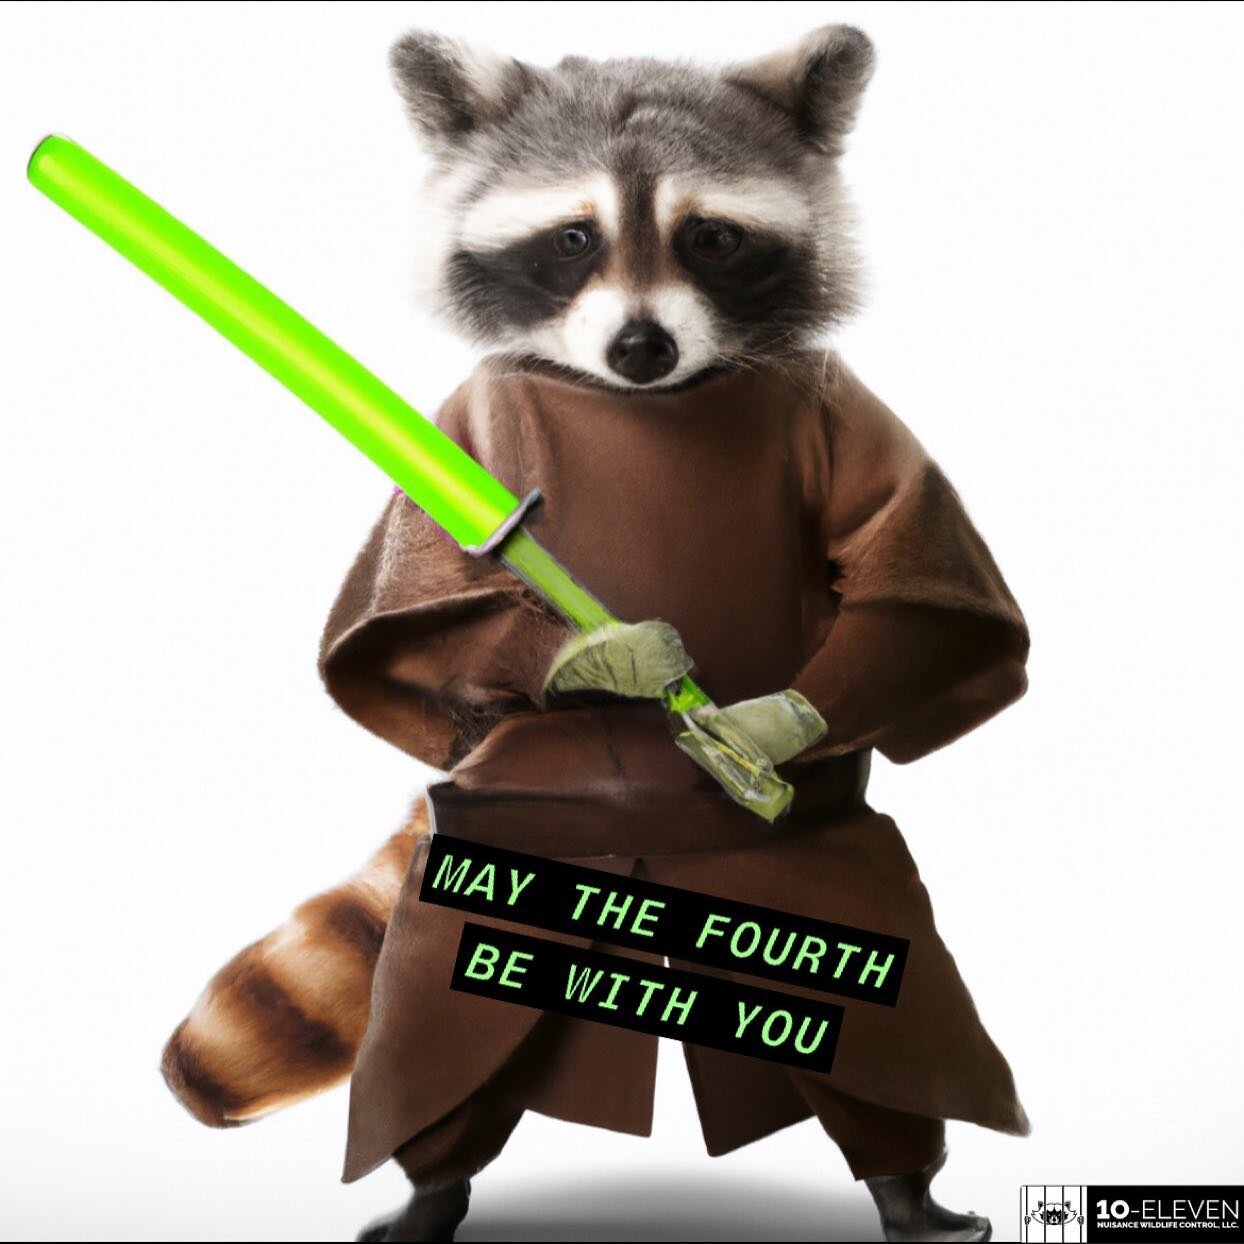 May the Fourth be with you!  Are you dealing with unwanted wildlife on your property? Let our team at 10-Eleven Nuisance Wildlife Control be your Jedi and protect your home or business. Contact us today to schedule a consultation and may the force be